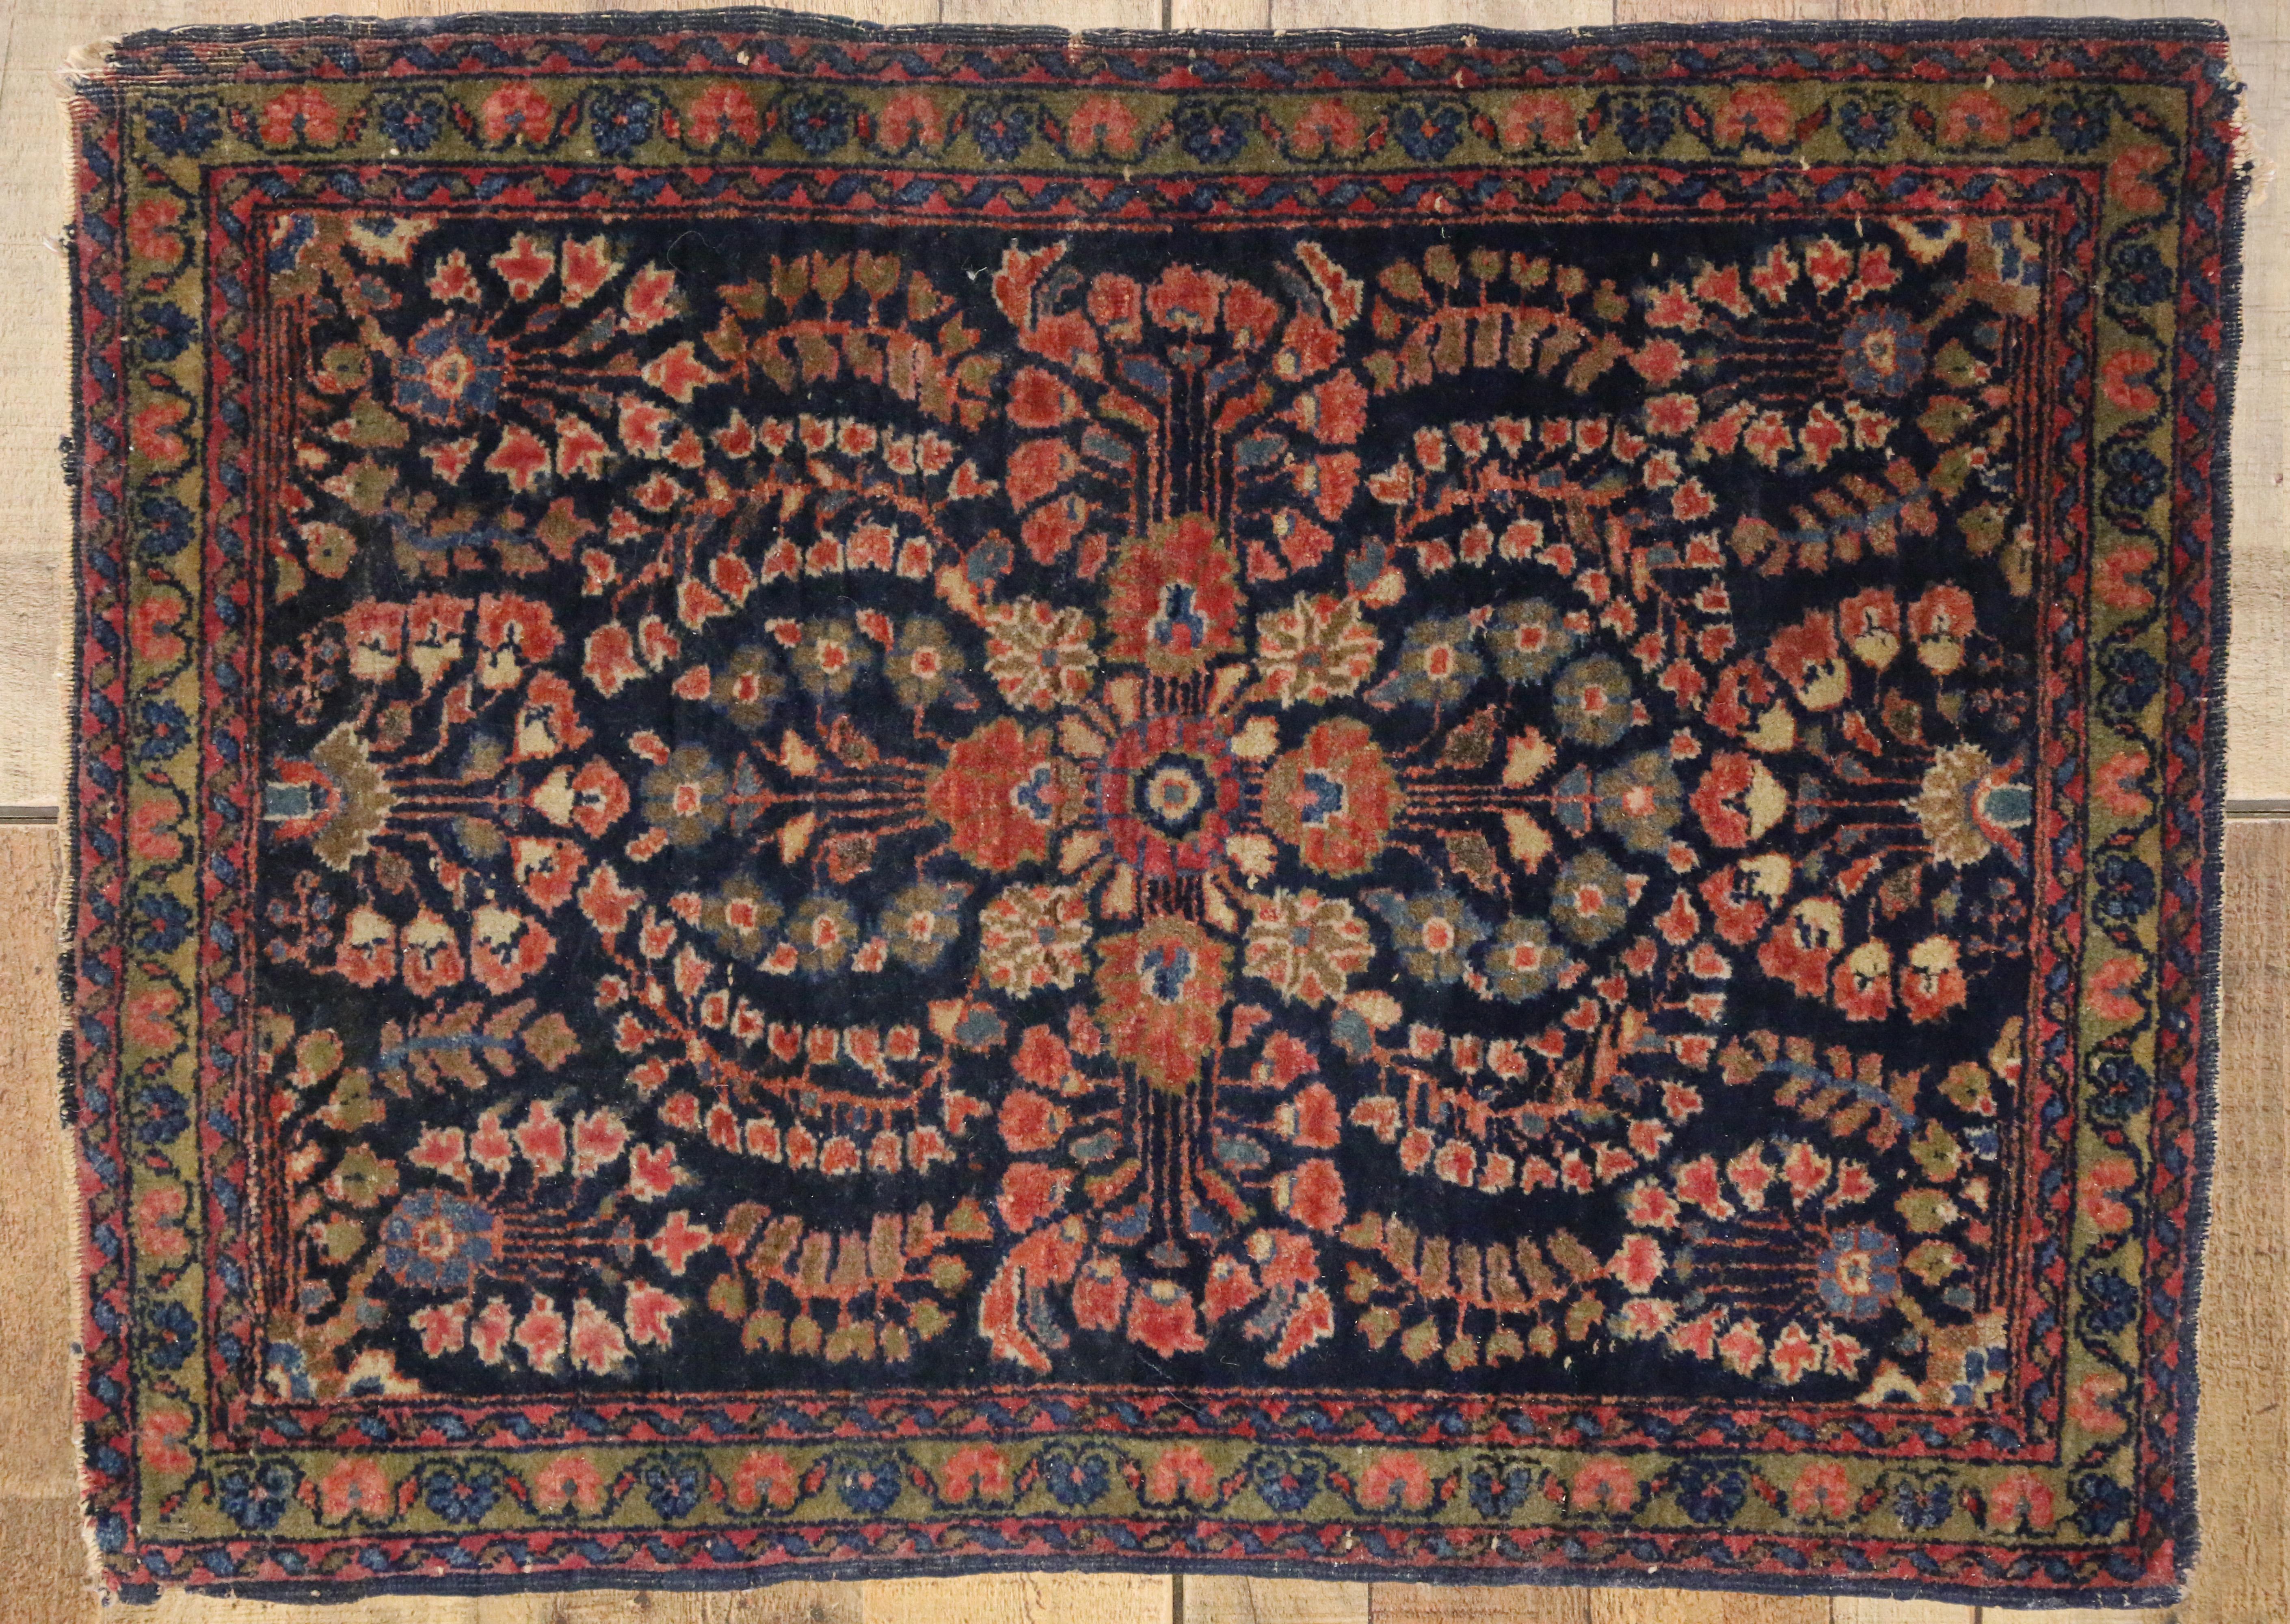 Hand-Knotted Antique Persian Sarouk Accent Rug, Small Persian Rug with Modern Victorian Style